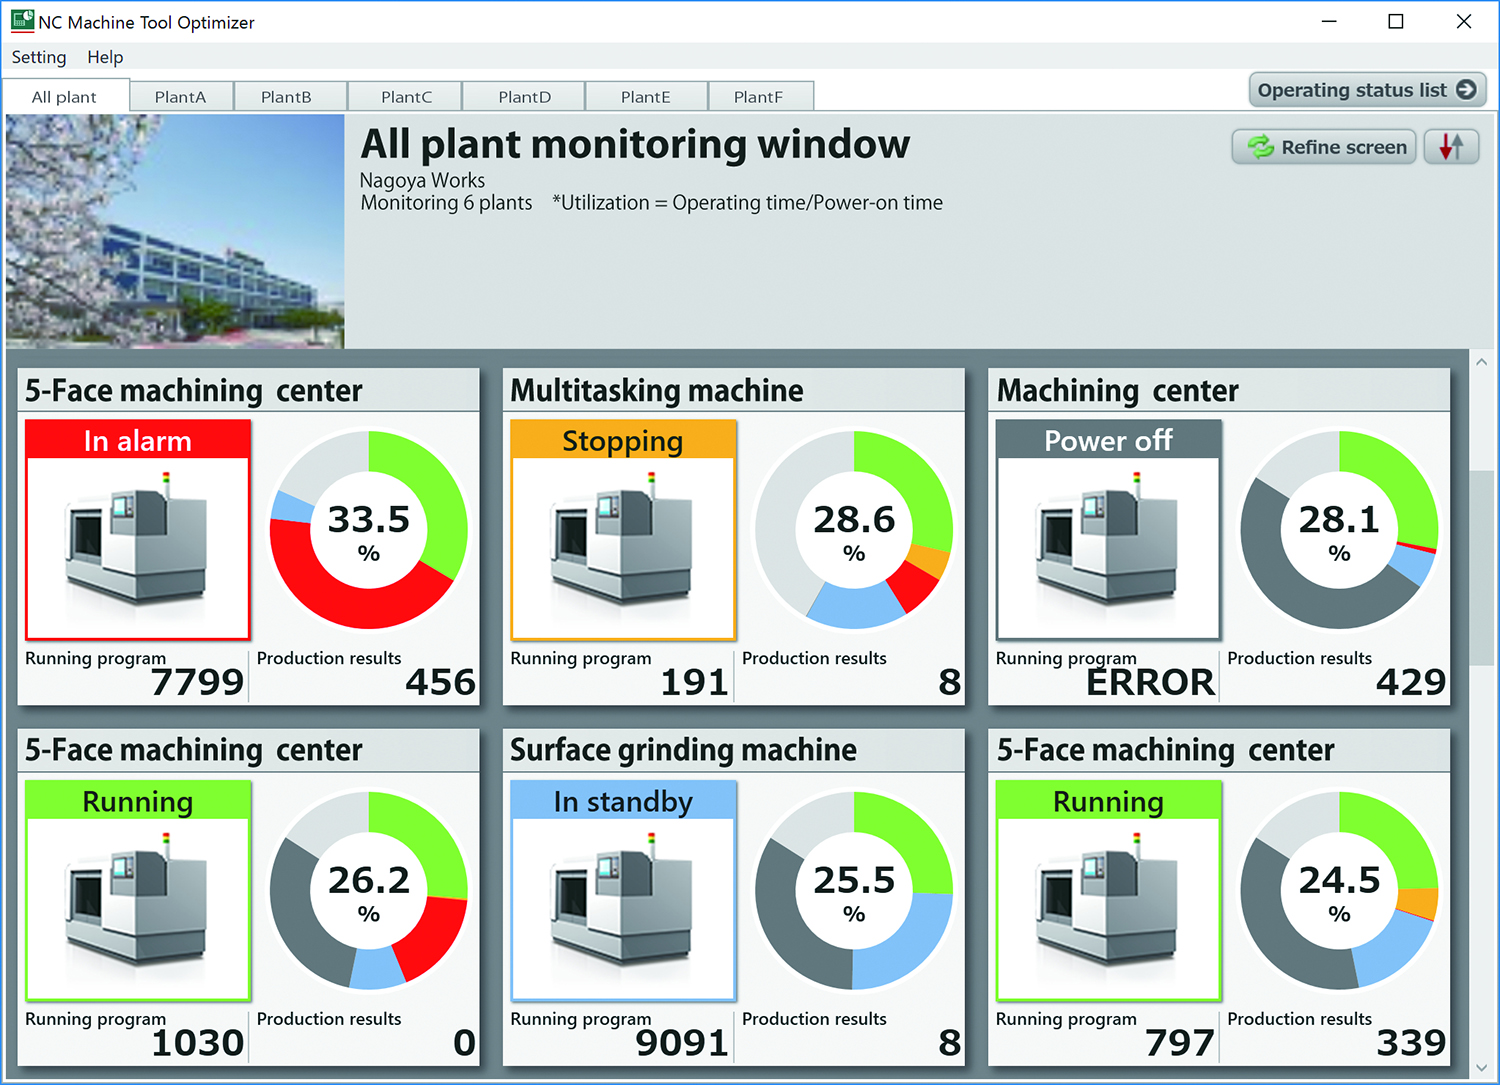 Mitsubishi Electric’s NC Machine Tool Optimizer can interpret information received from multiple machine tools to provide an intuitive process visualisation and monitoring platform. [Source: Mitsubishi Electric Europe B.V.]